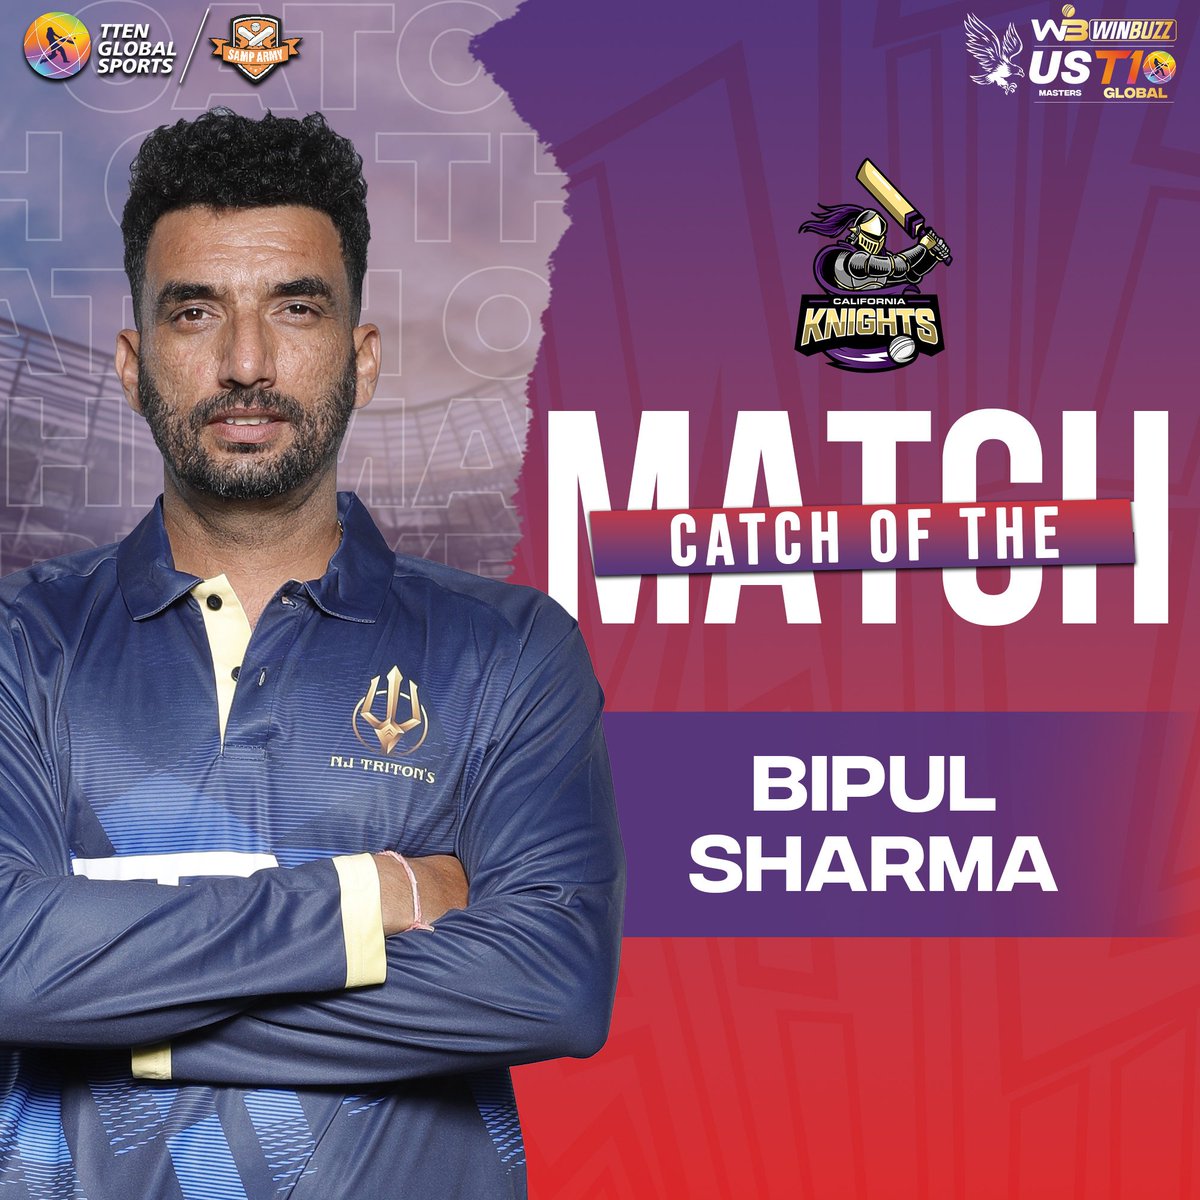 Match 2 ⏭️ New Jersey Triton’s vs California Knights 

Catch of the Match award goes to Bipul Sharma for his dismissal of Irfan Pathan 🫴🏏

#NJTvCK
#USMastersT10 
#SunshineStarsSixes
#CricketsFastestFormat
#T10League